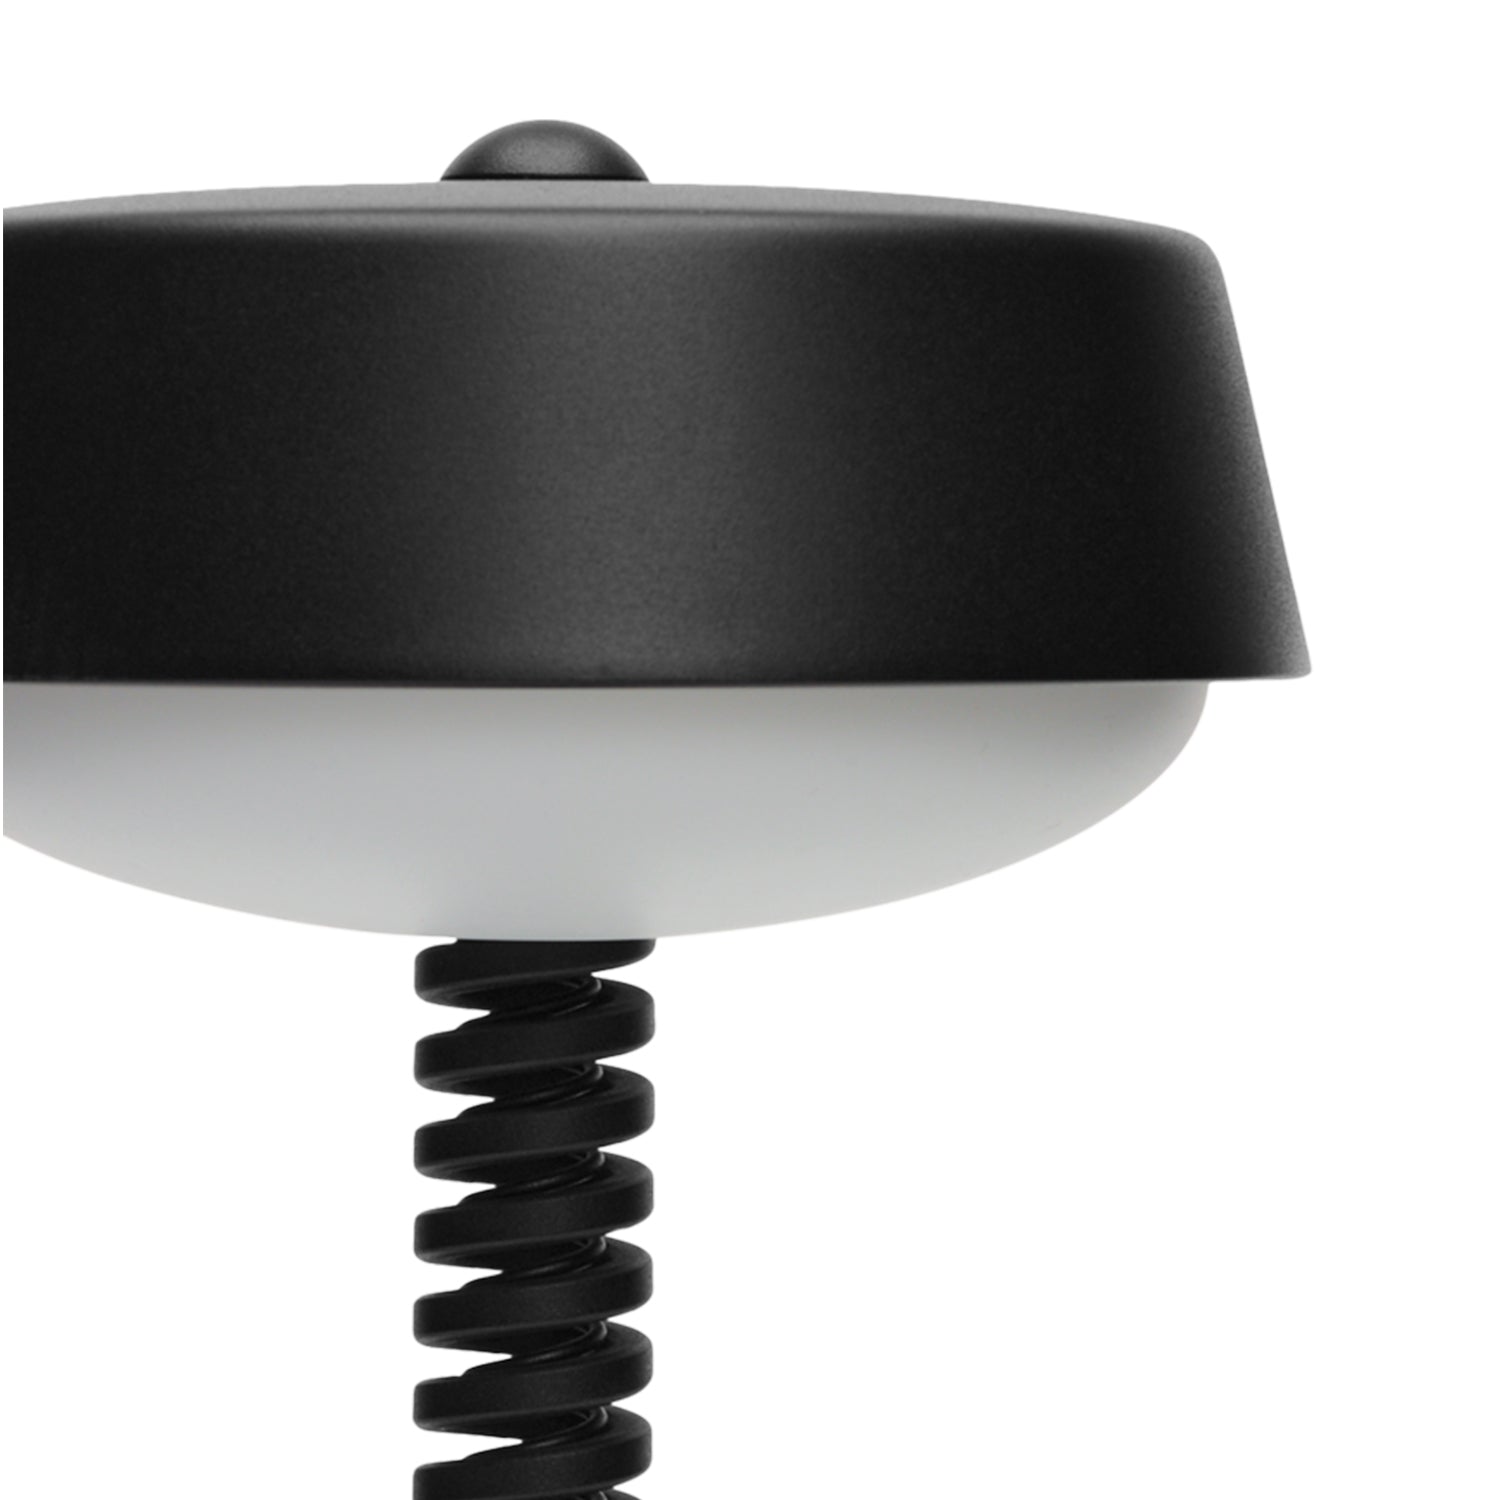 Bellboy Rechargeable Lamp - The Design Choice